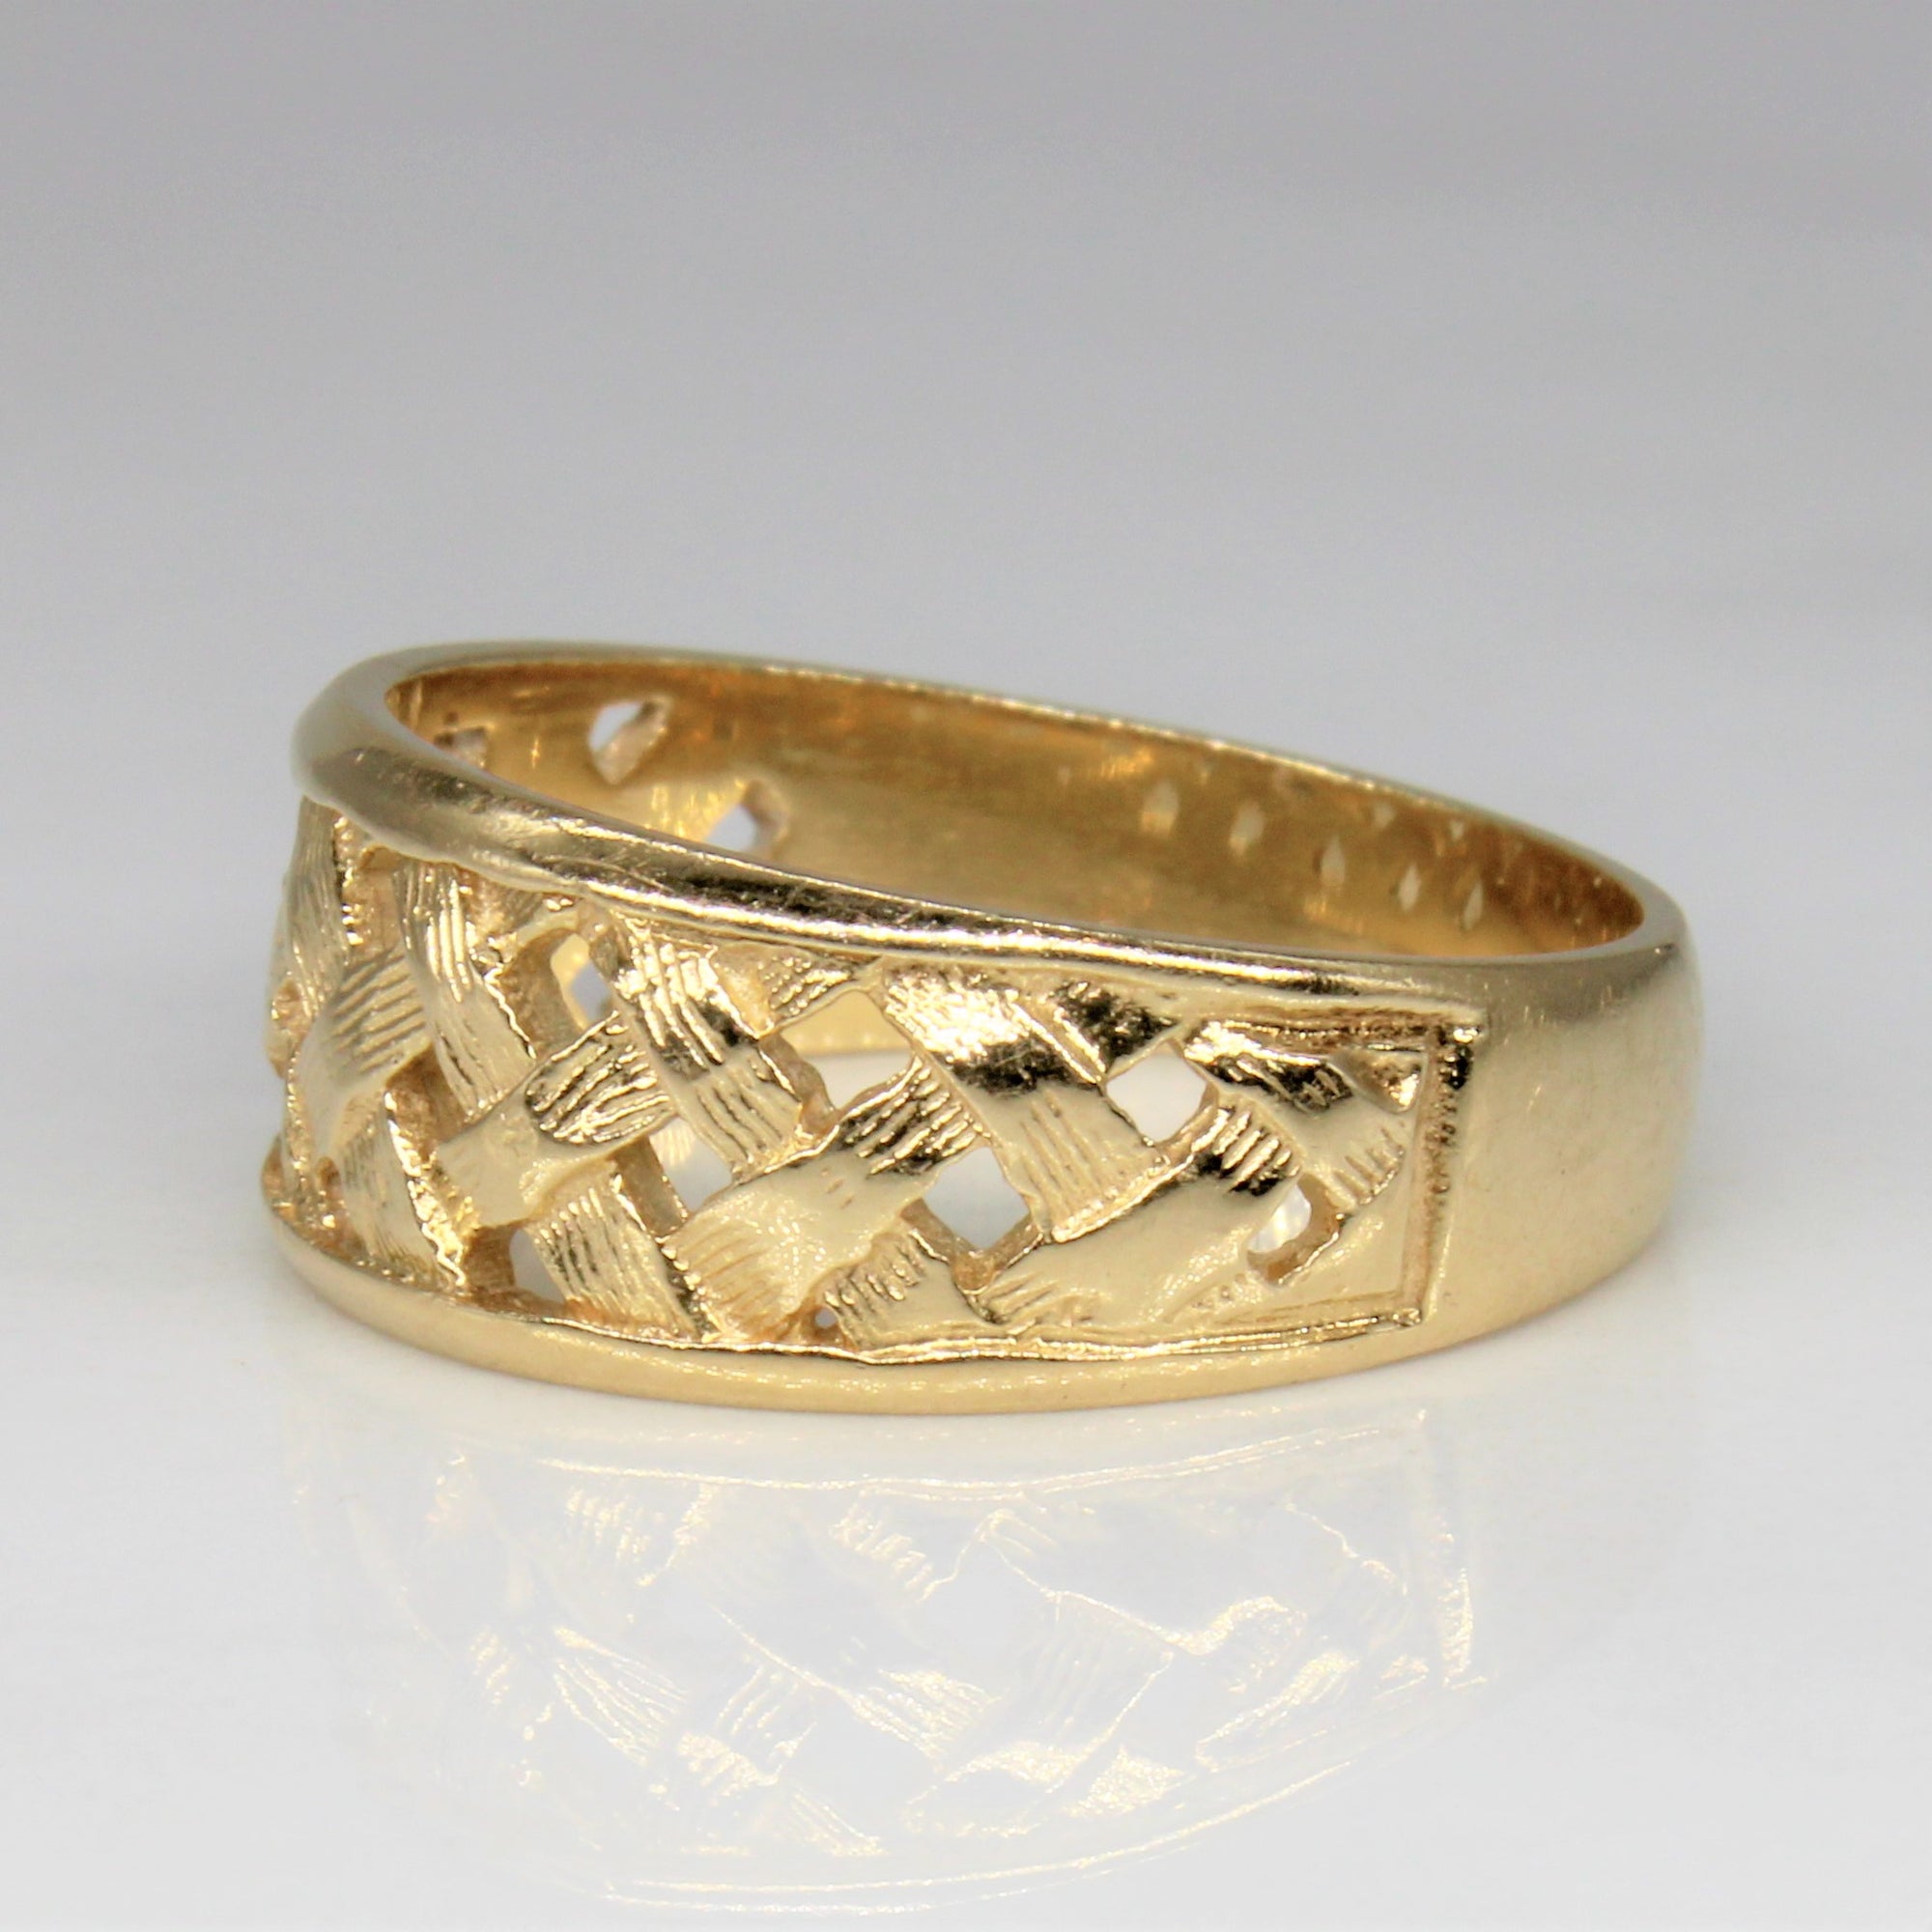 Textured Woven Gold Ring | SZ 6.25 |